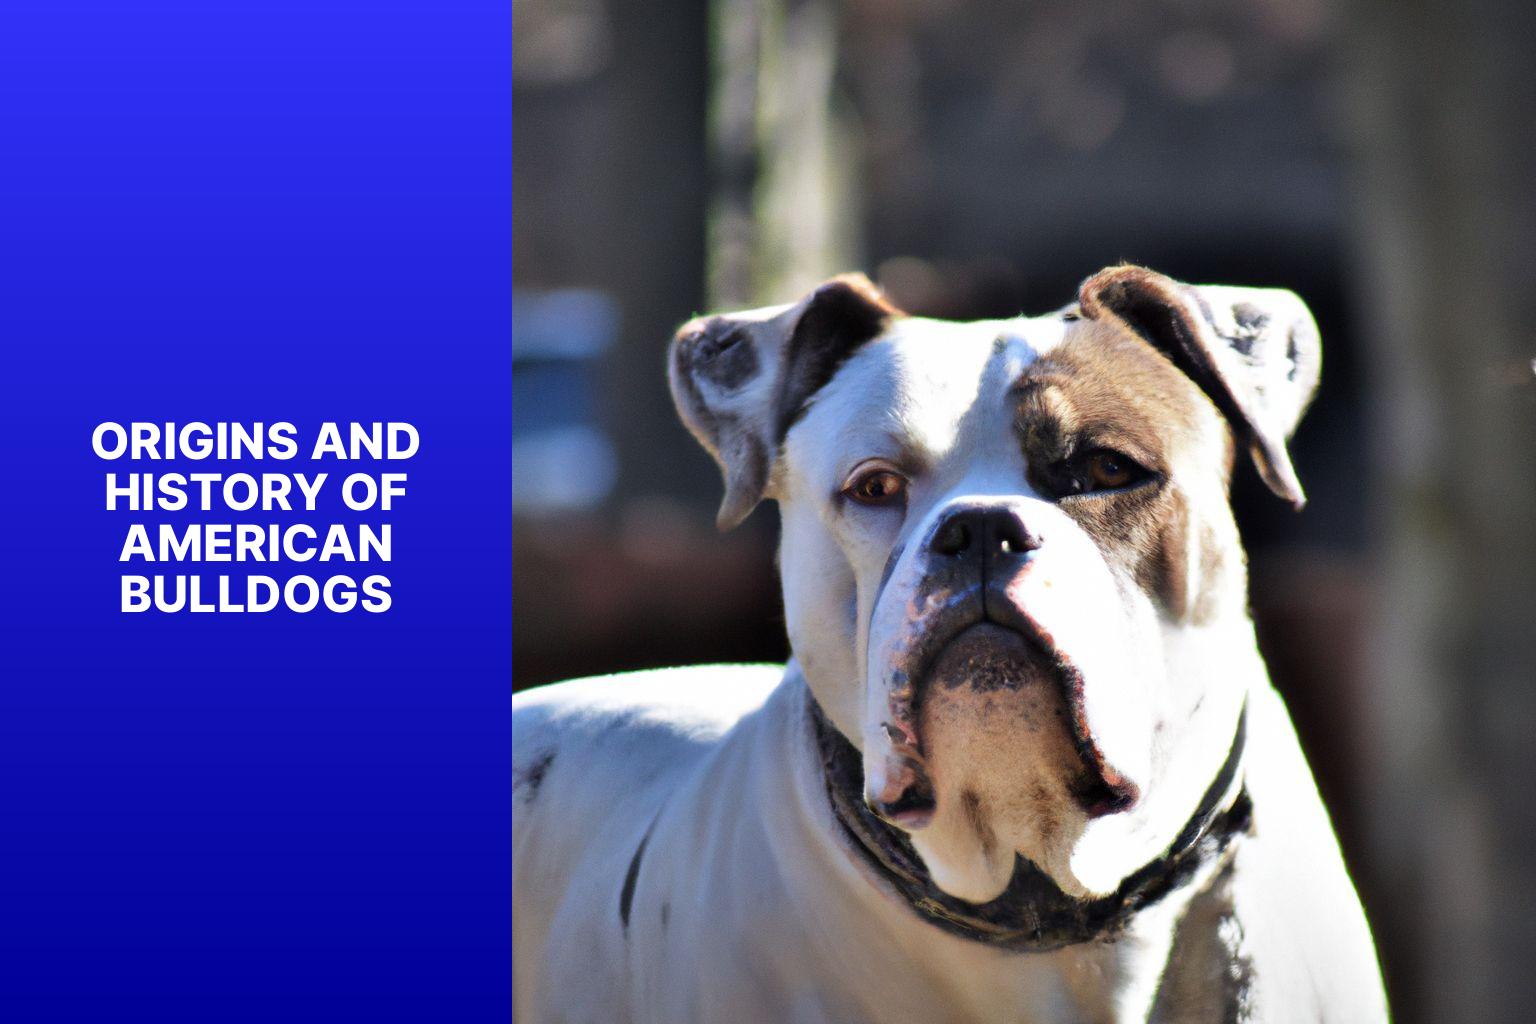 Origins and History of American Bulldogs - From Bulldogs to Heroes: Tracing American Bull Dog History 